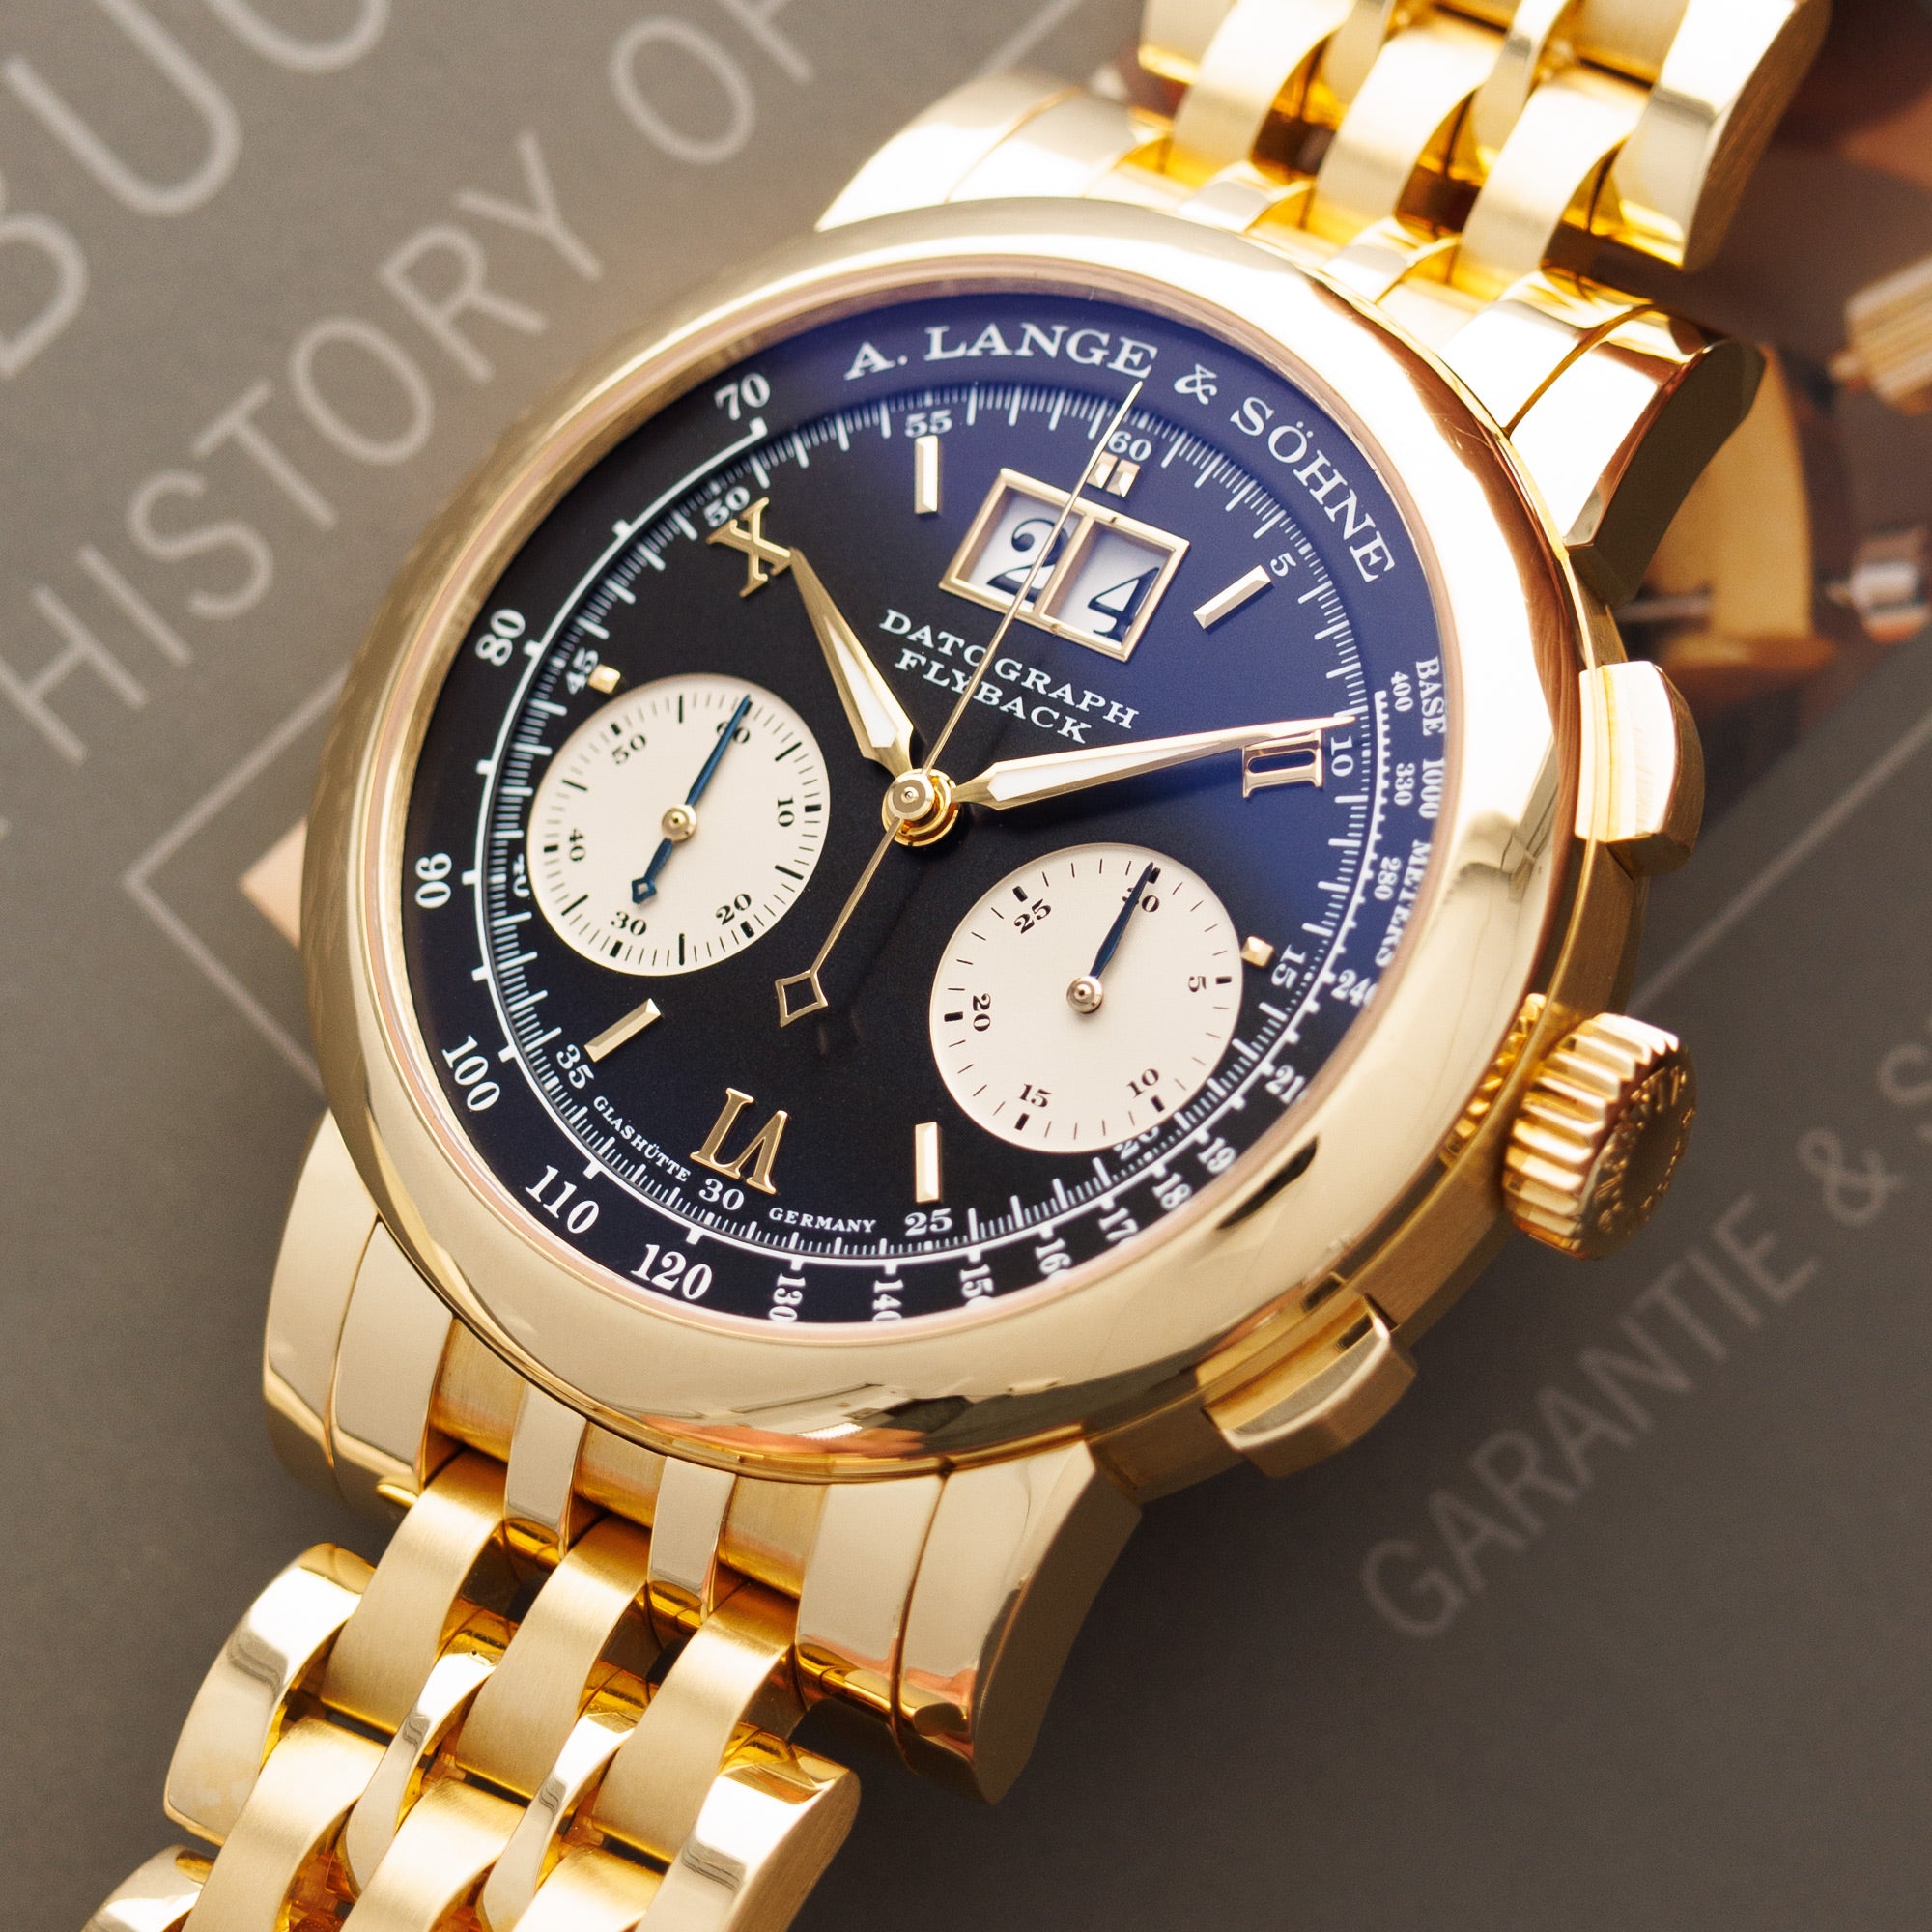 A. Lange & Sohne - A. Lange & Sohne Yellow Gold Datograph Watch Ref. 403.041 on Wellendorf Bracelet - The Keystone Watches